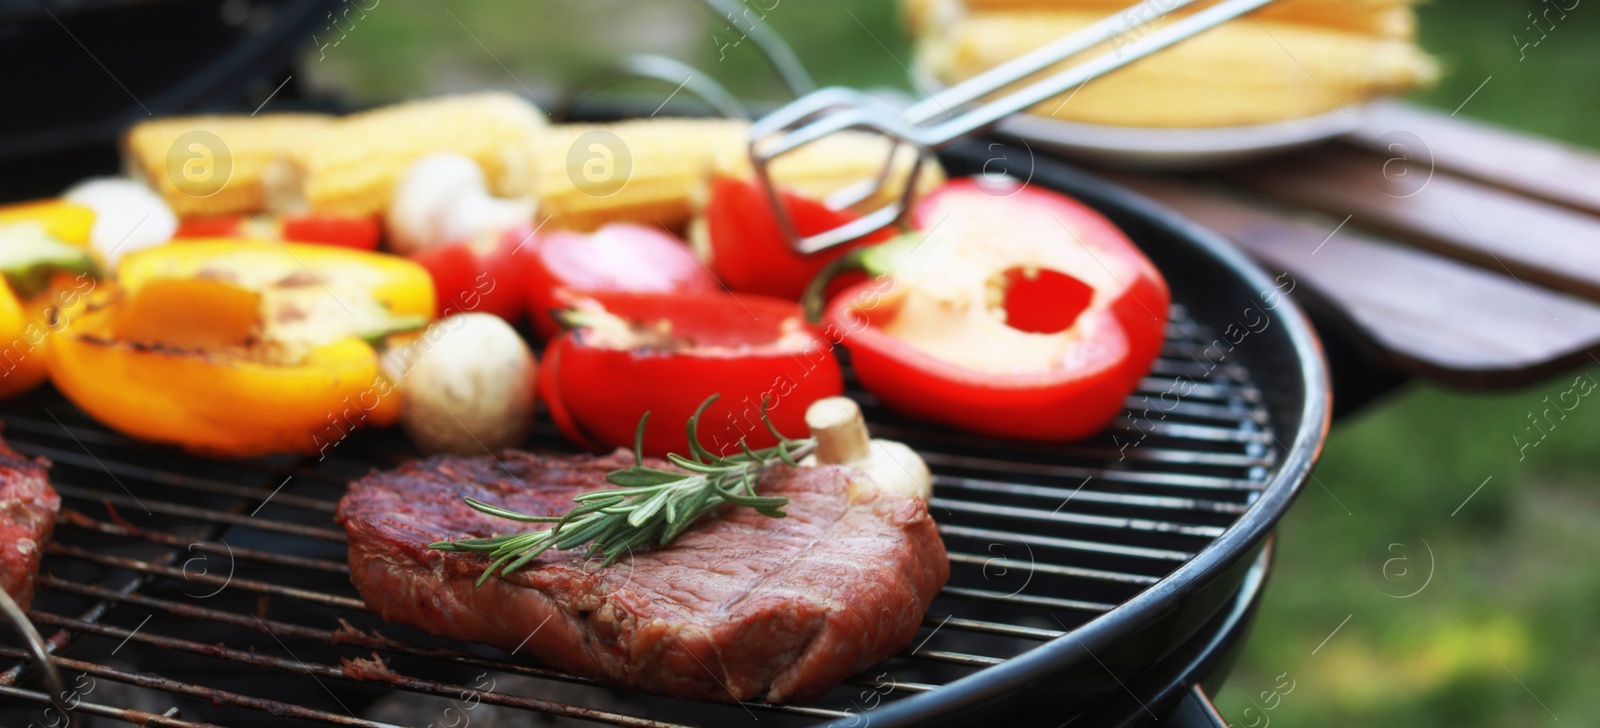 Image of Cooking meat and vegetables on barbecue grill outdoors, closeup. Banner design